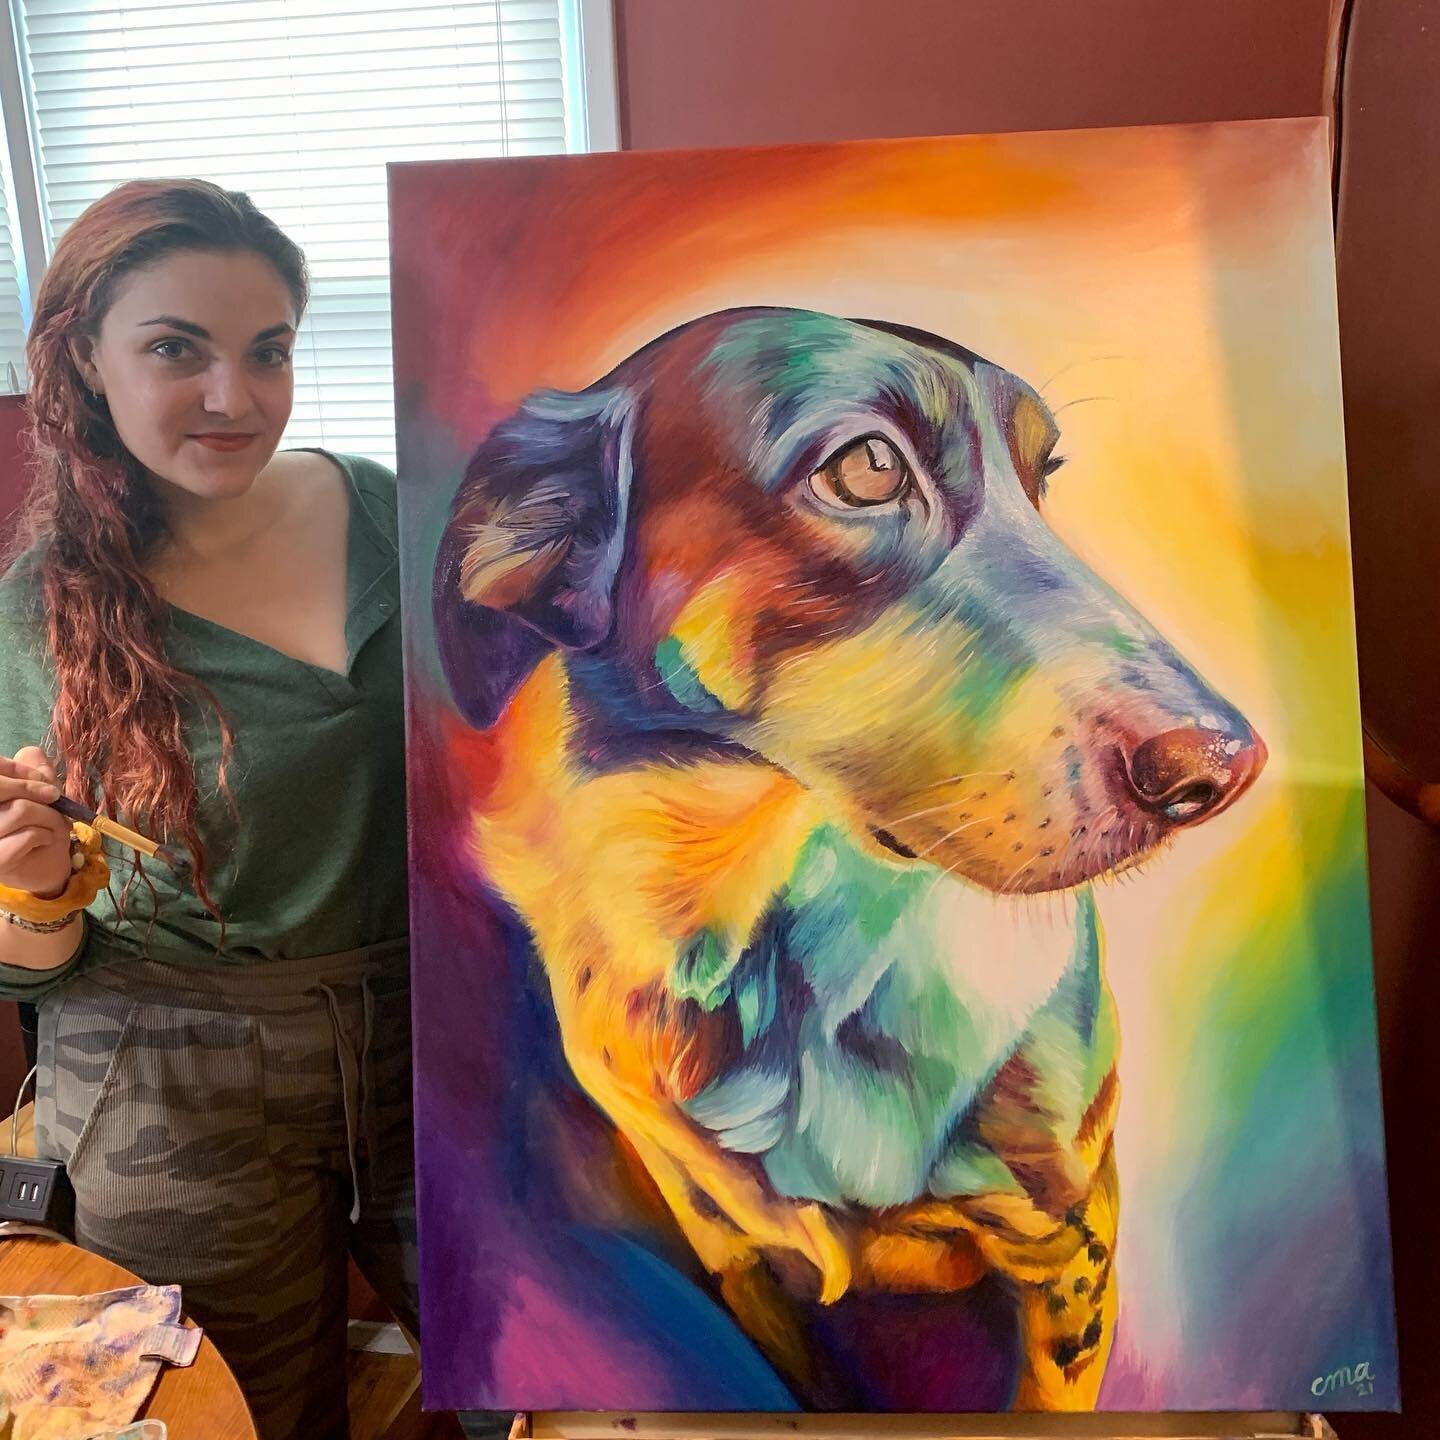 Now for something completely different! First time using oils in a looong time, by far my biggest canvas yet, and stepped way out of my comfort zone with the rainbow color scheme! It is fitting because this lovely pup, Steven, has crossed the rainbow